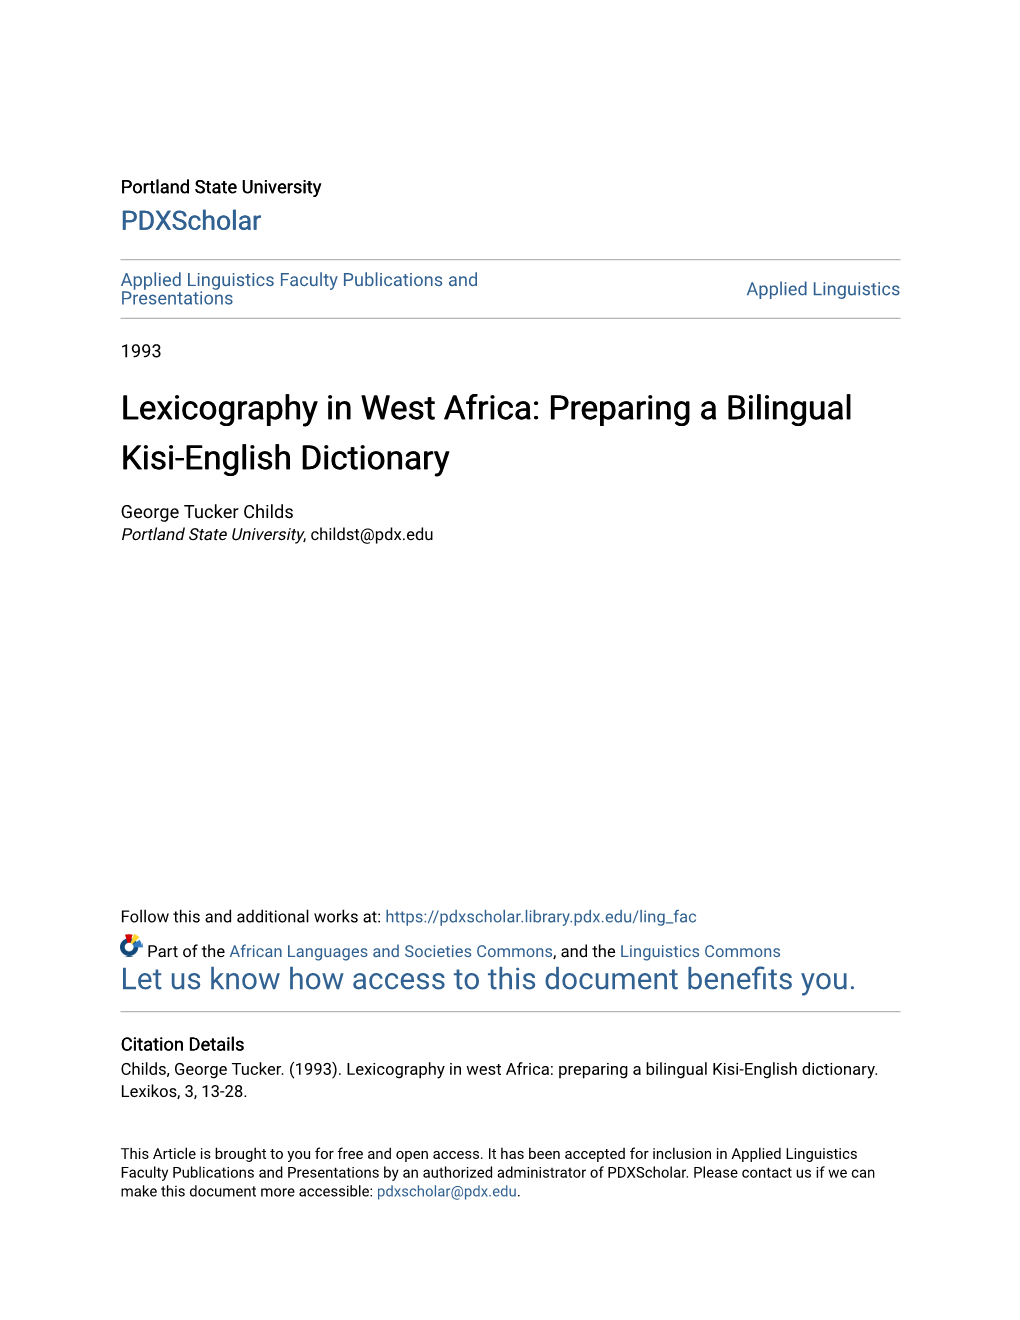 Lexicography in West Africa: Preparing a Bilingual Kisi-English Dictionary